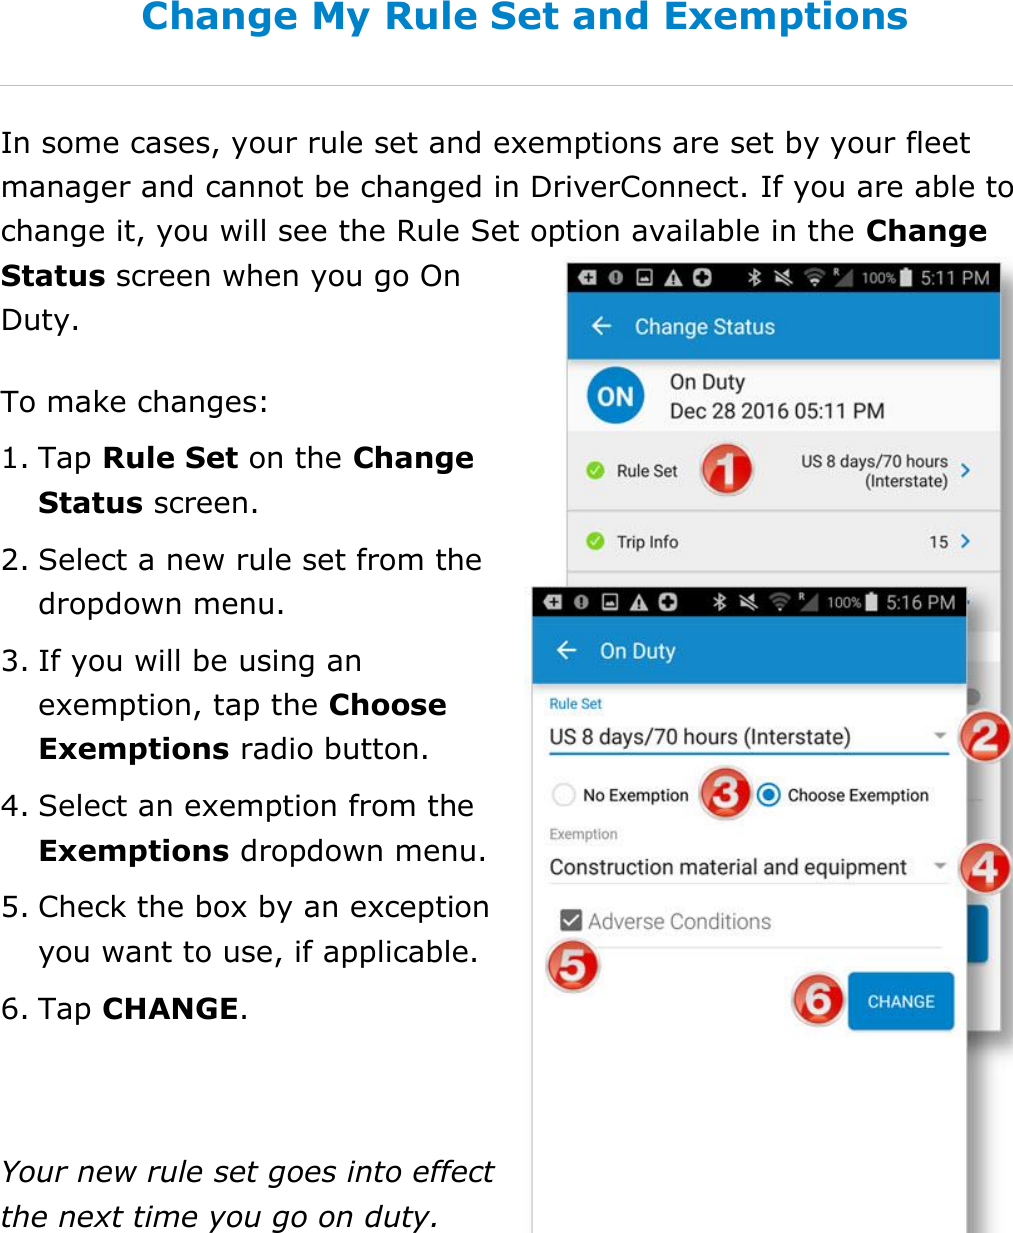 Change My Settings DriverConnect User Guide  81 © 2016-2017, Rand McNally, Inc. Change My Rule Set and Exemptions In some cases, your rule set and exemptions are set by your fleet manager and cannot be changed in DriverConnect. If you are able to change it, you will see the Rule Set option available in the Change Status screen when you go On Duty. To make changes: 1. Tap Rule Set on the Change Status screen.  2. Select a new rule set from the dropdown menu. 3. If you will be using an exemption, tap the Choose Exemptions radio button. 4. Select an exemption from the Exemptions dropdown menu. 5. Check the box by an exception you want to use, if applicable. 6. Tap CHANGE.  Your new rule set goes into effect the next time you go on duty.